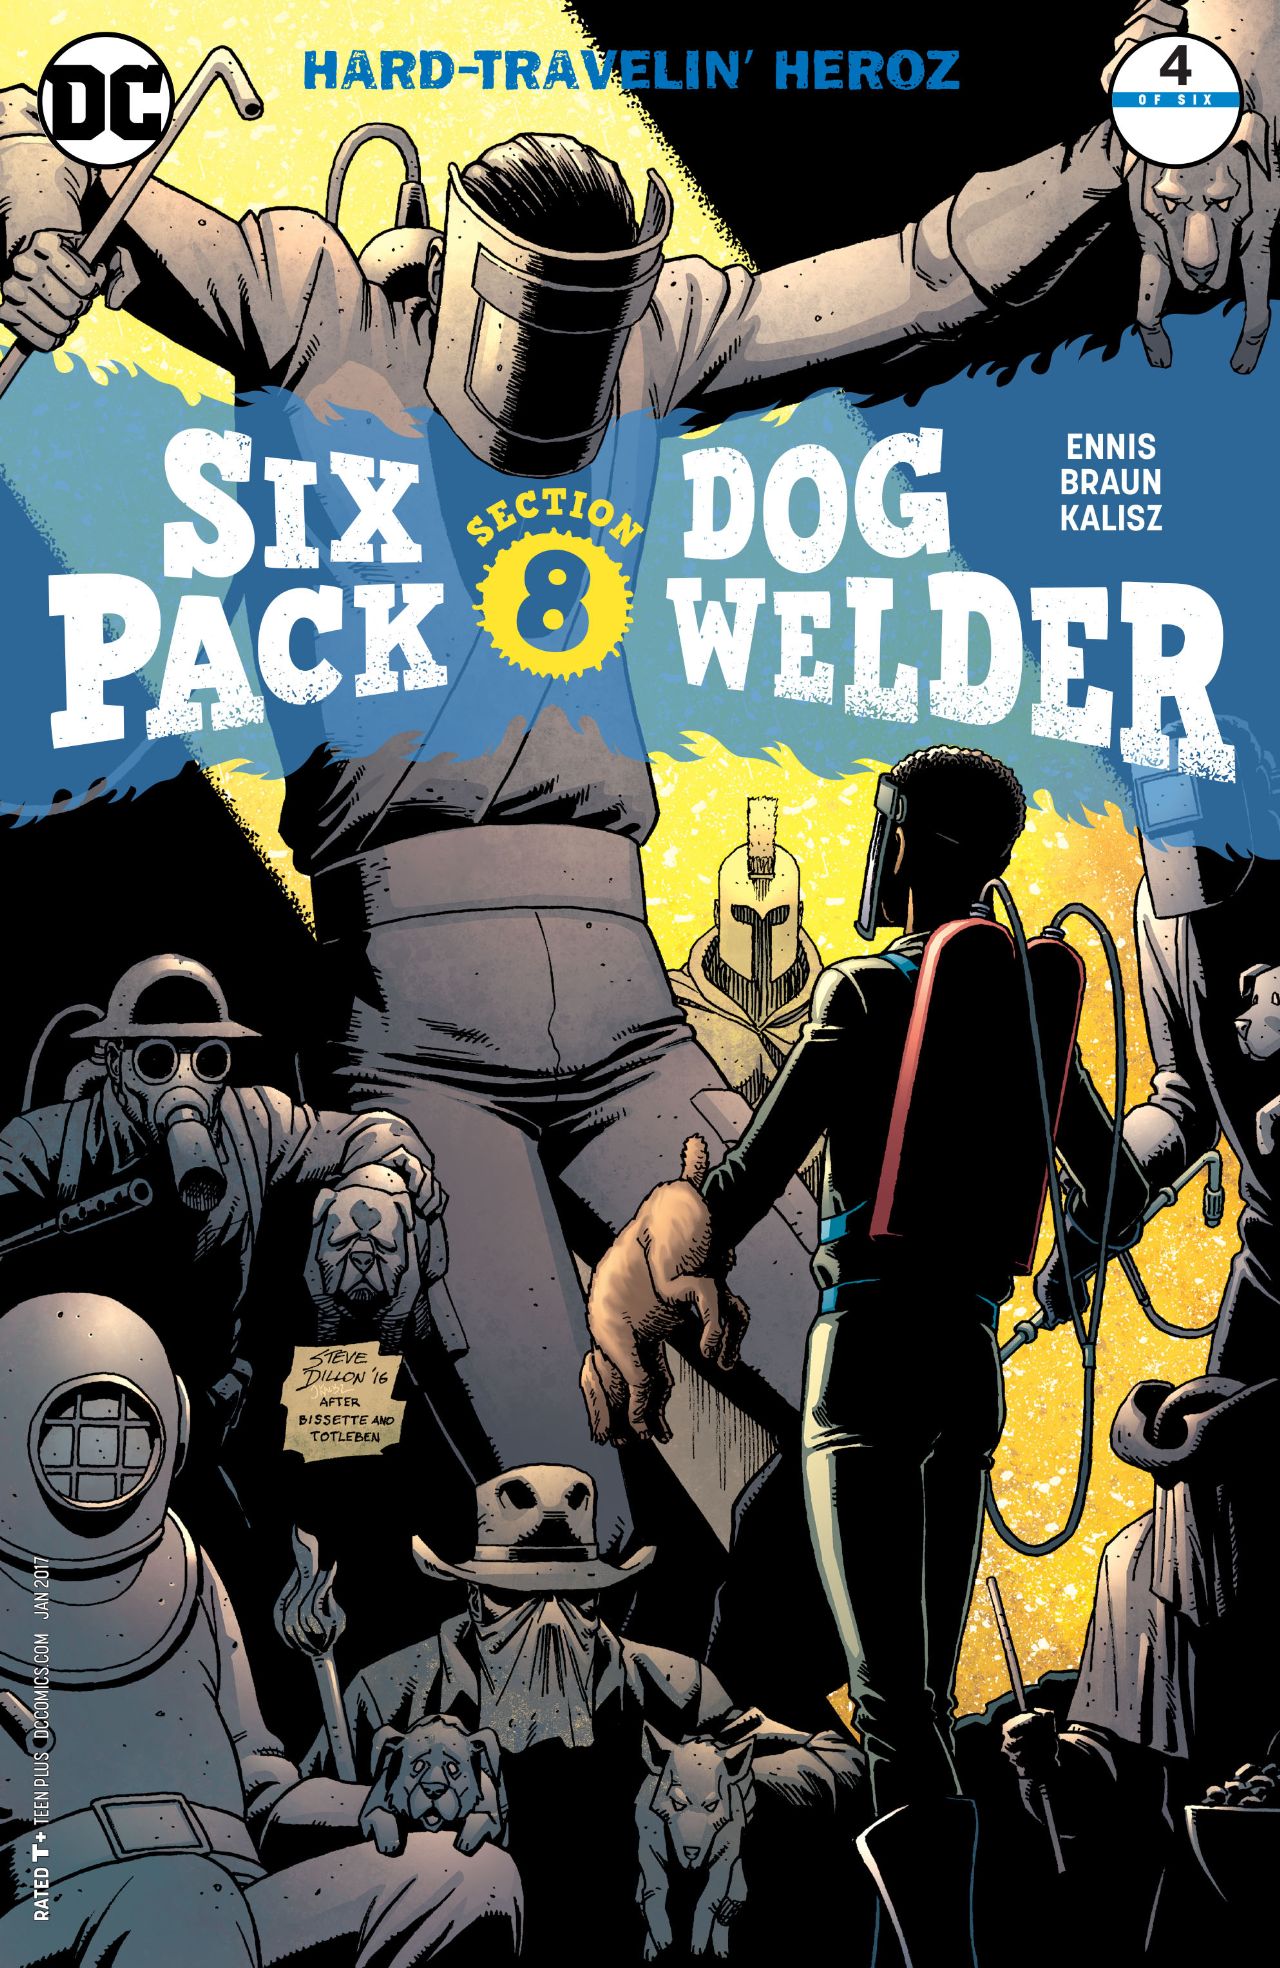 Sixpack and Dogwelder: Hard-Travelin’ Heroz #4 Review